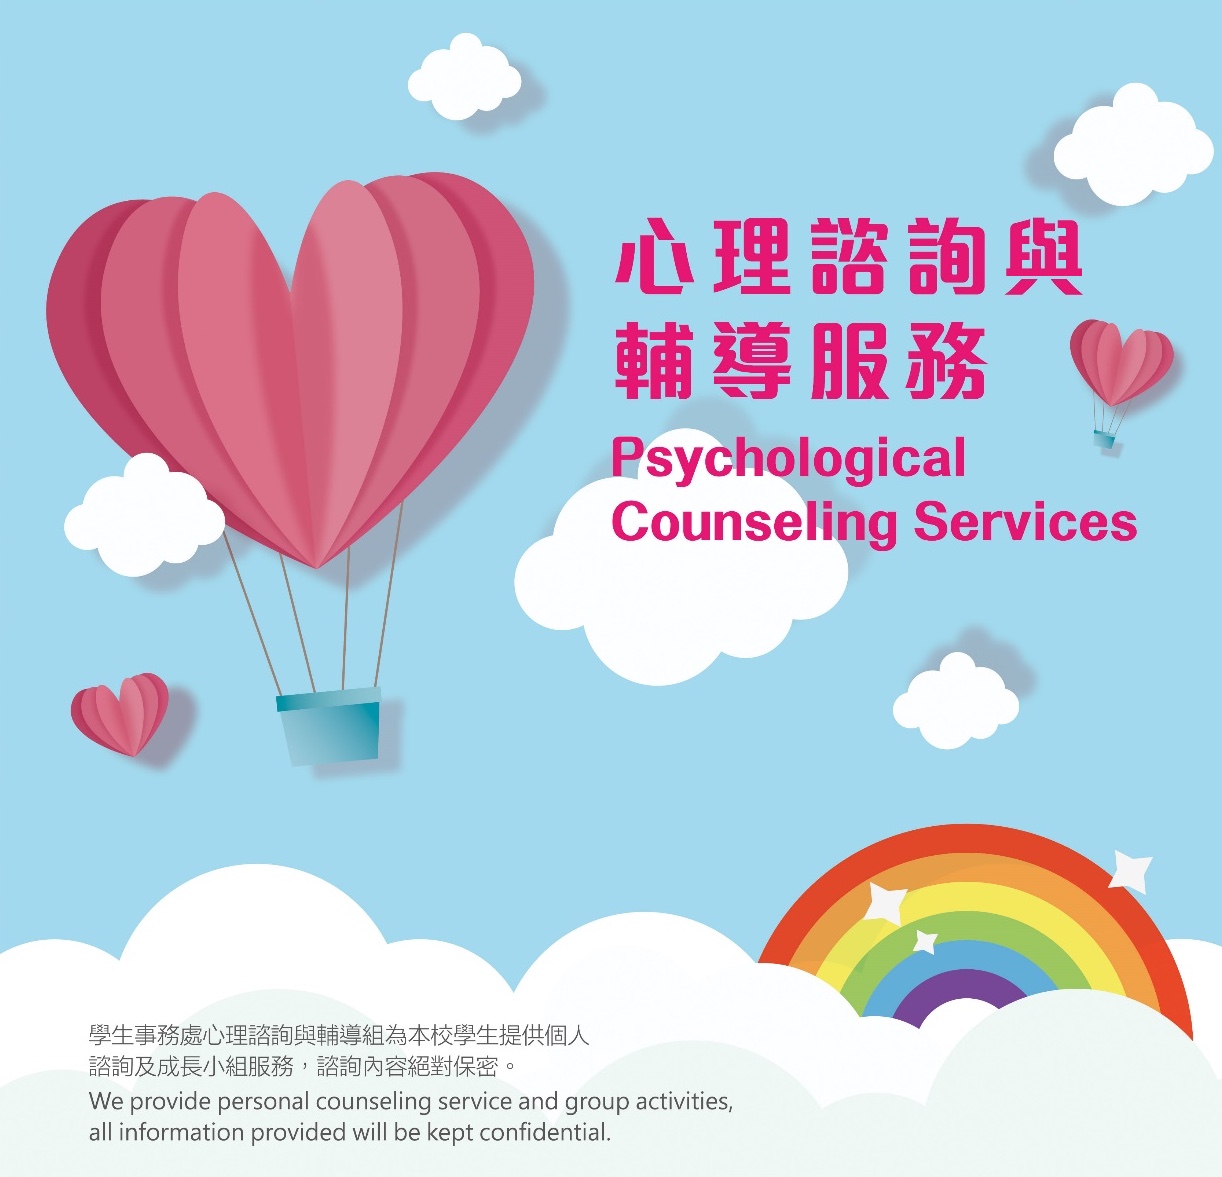 Psychological Counseling Service